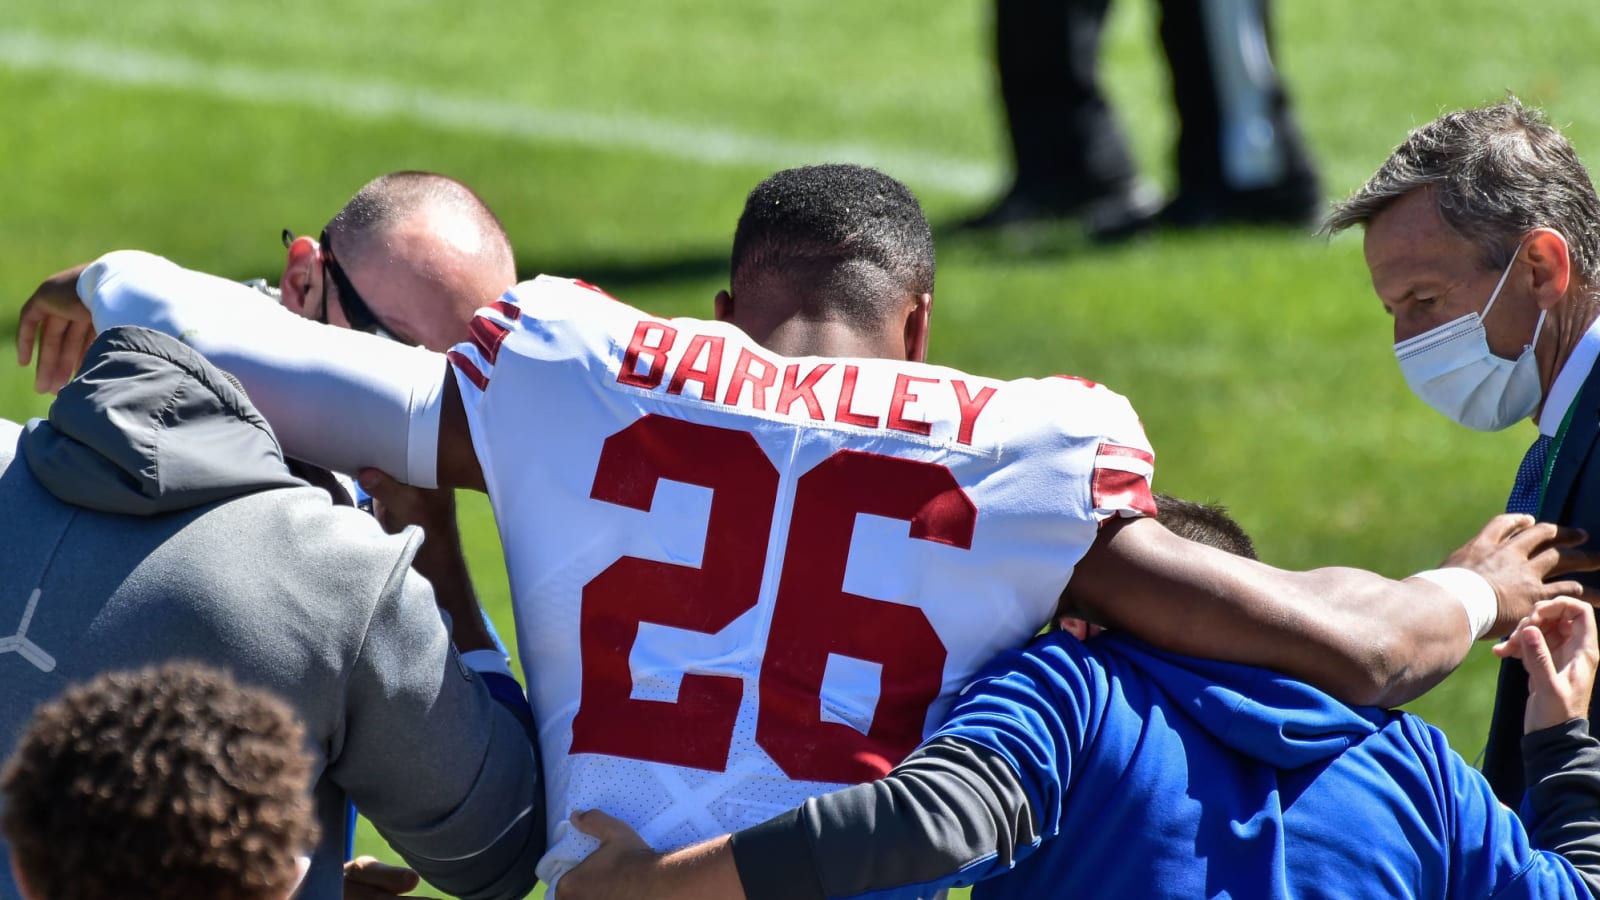 Report: Giants fear Saquon Barkley has torn ACL